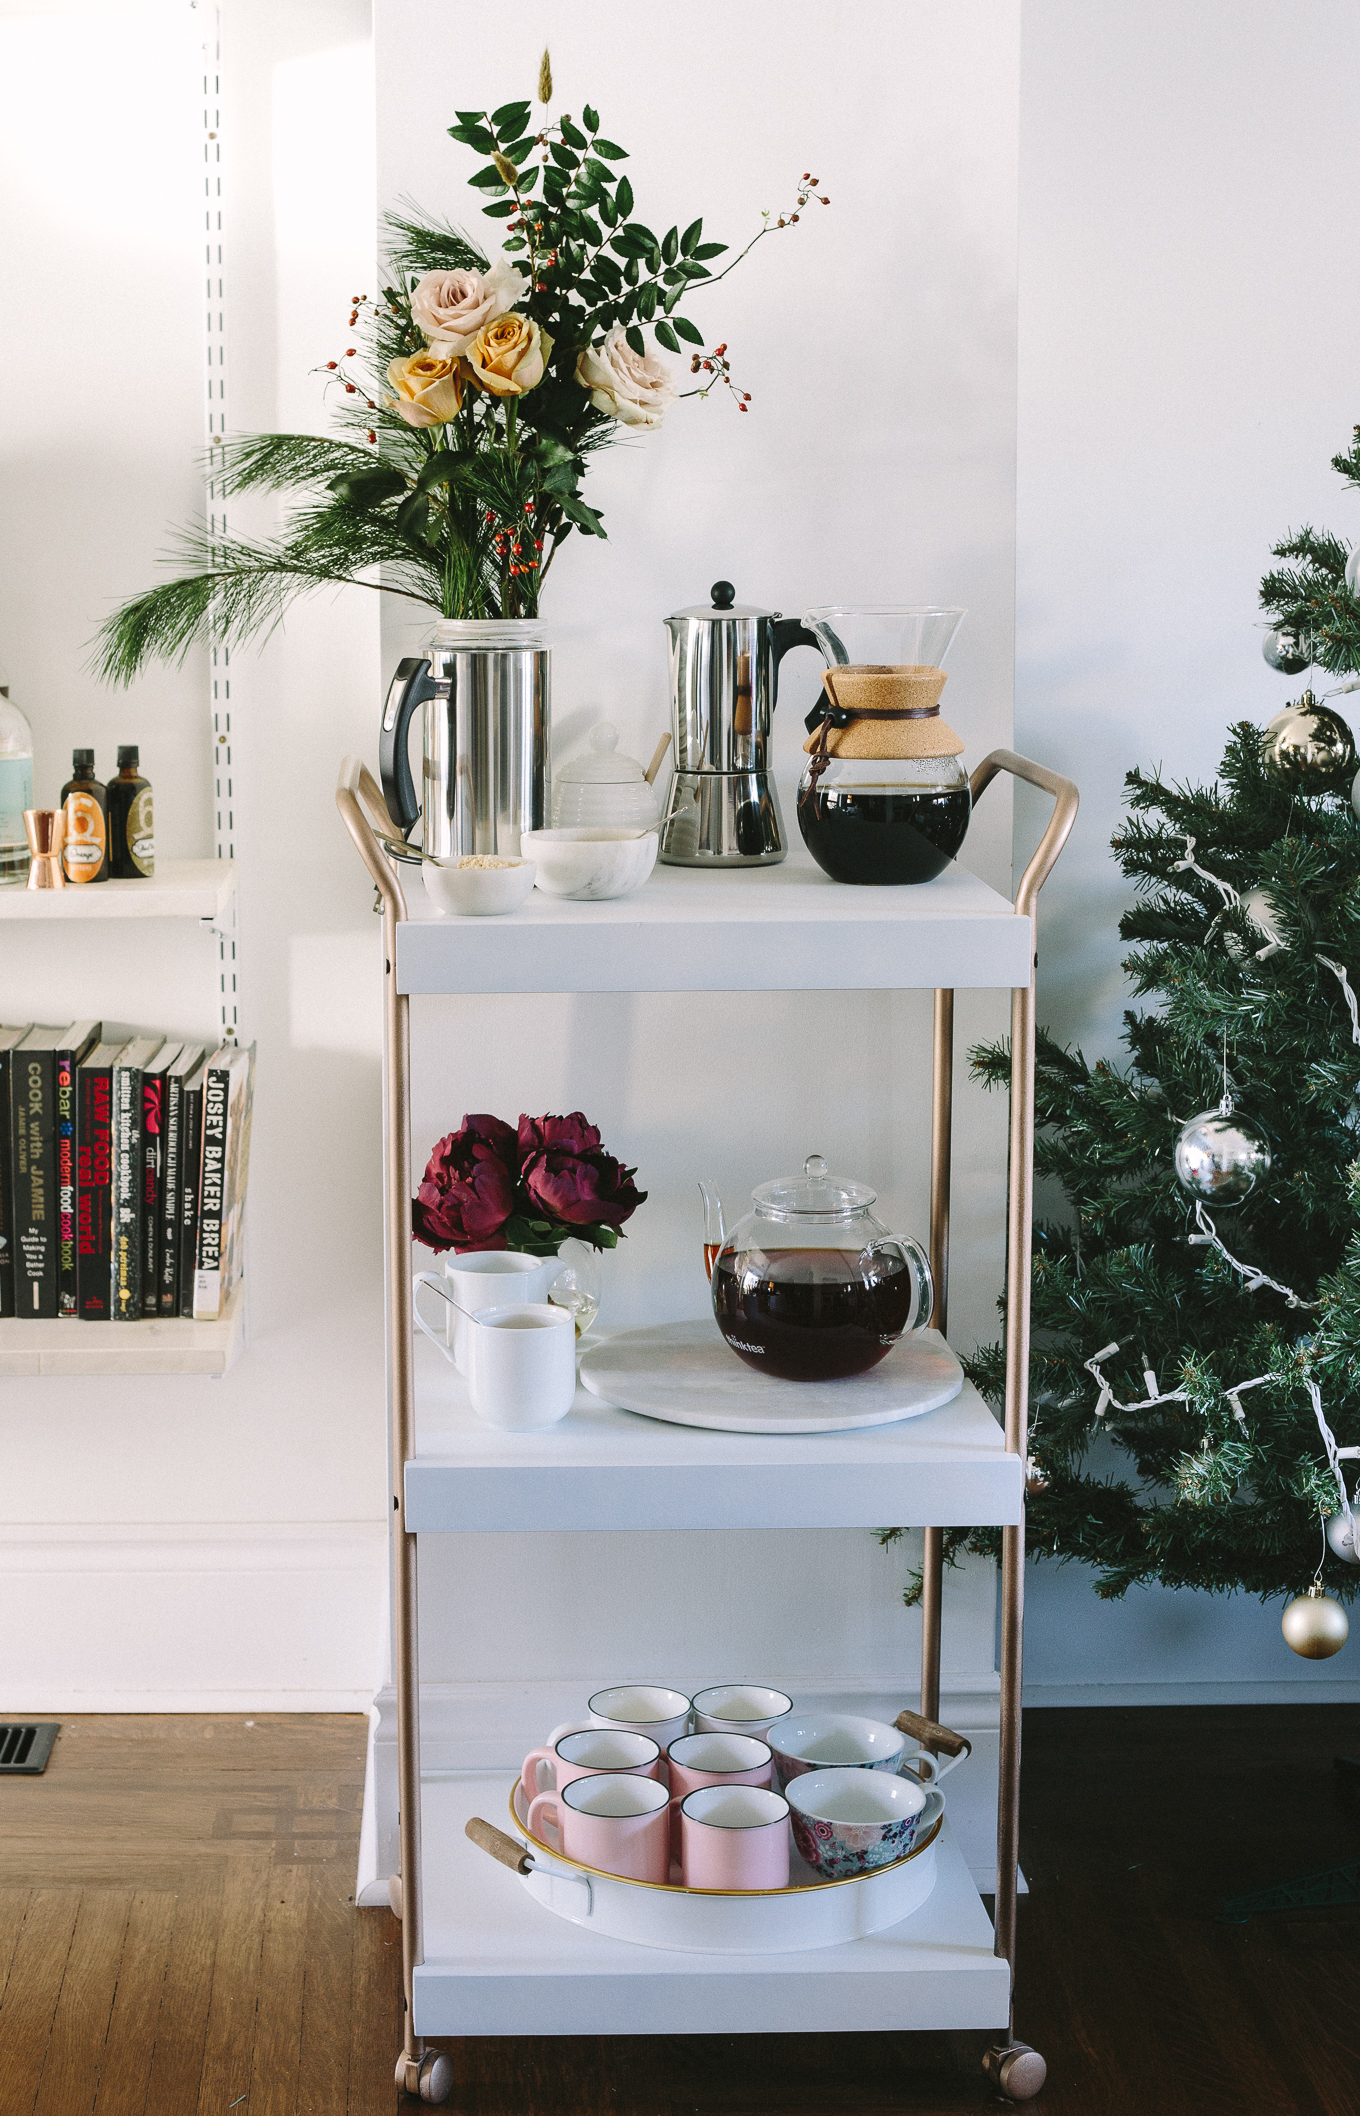 Straight-on shot of a beautiful bar cart filled with all things hip, modern coffee and tea.